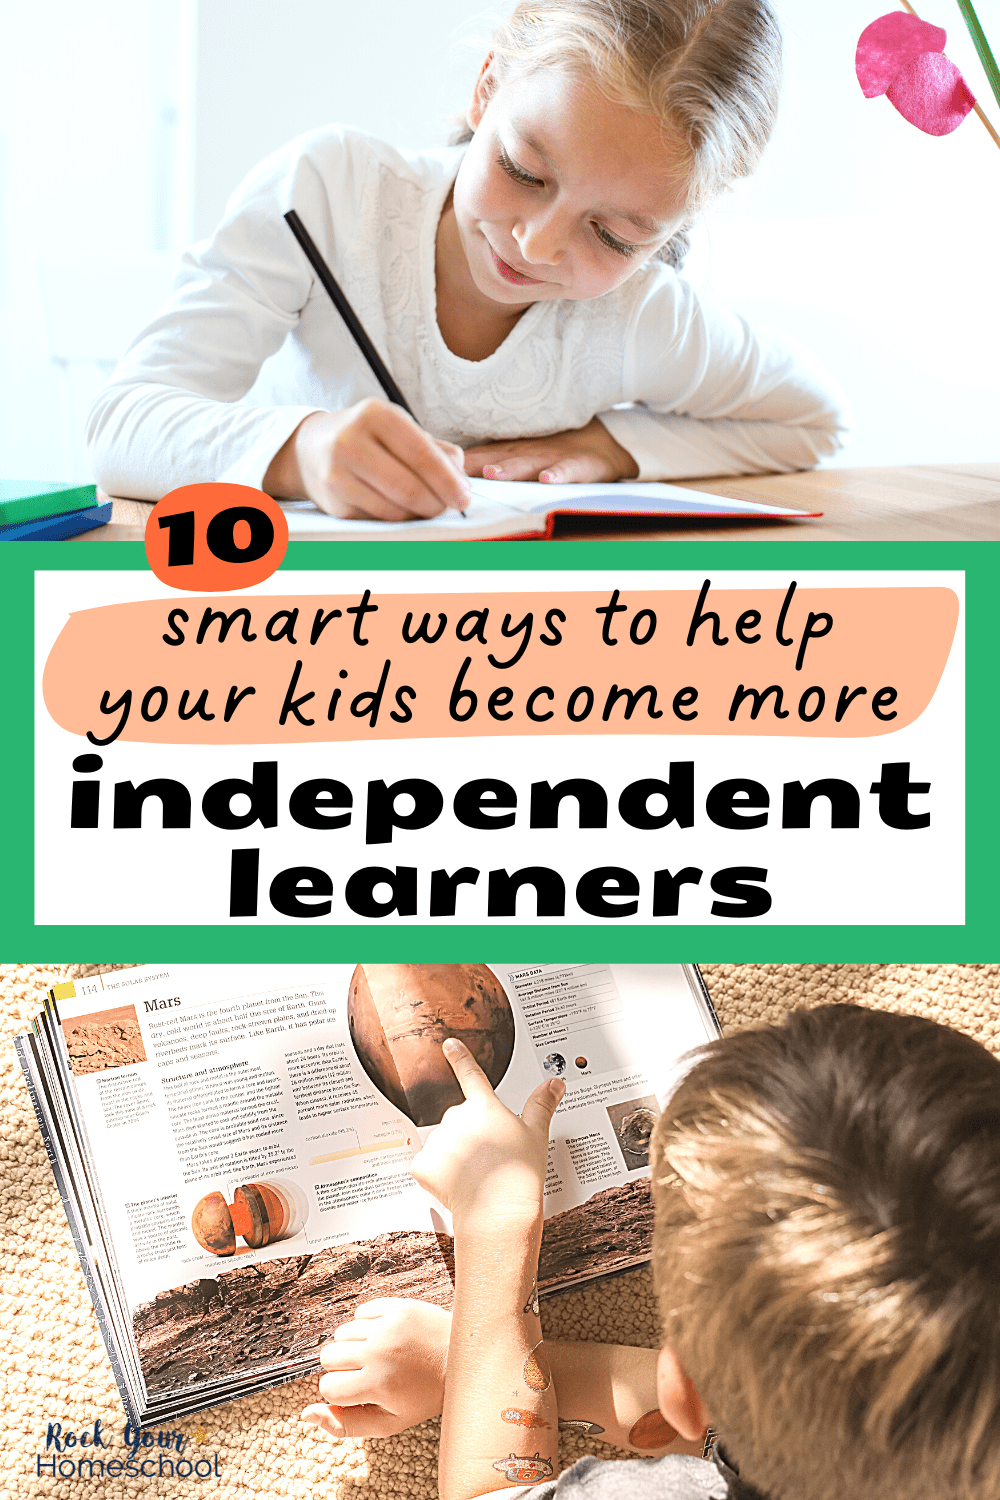 10 Smart Ways to Help Your Kids Be Independent Learners